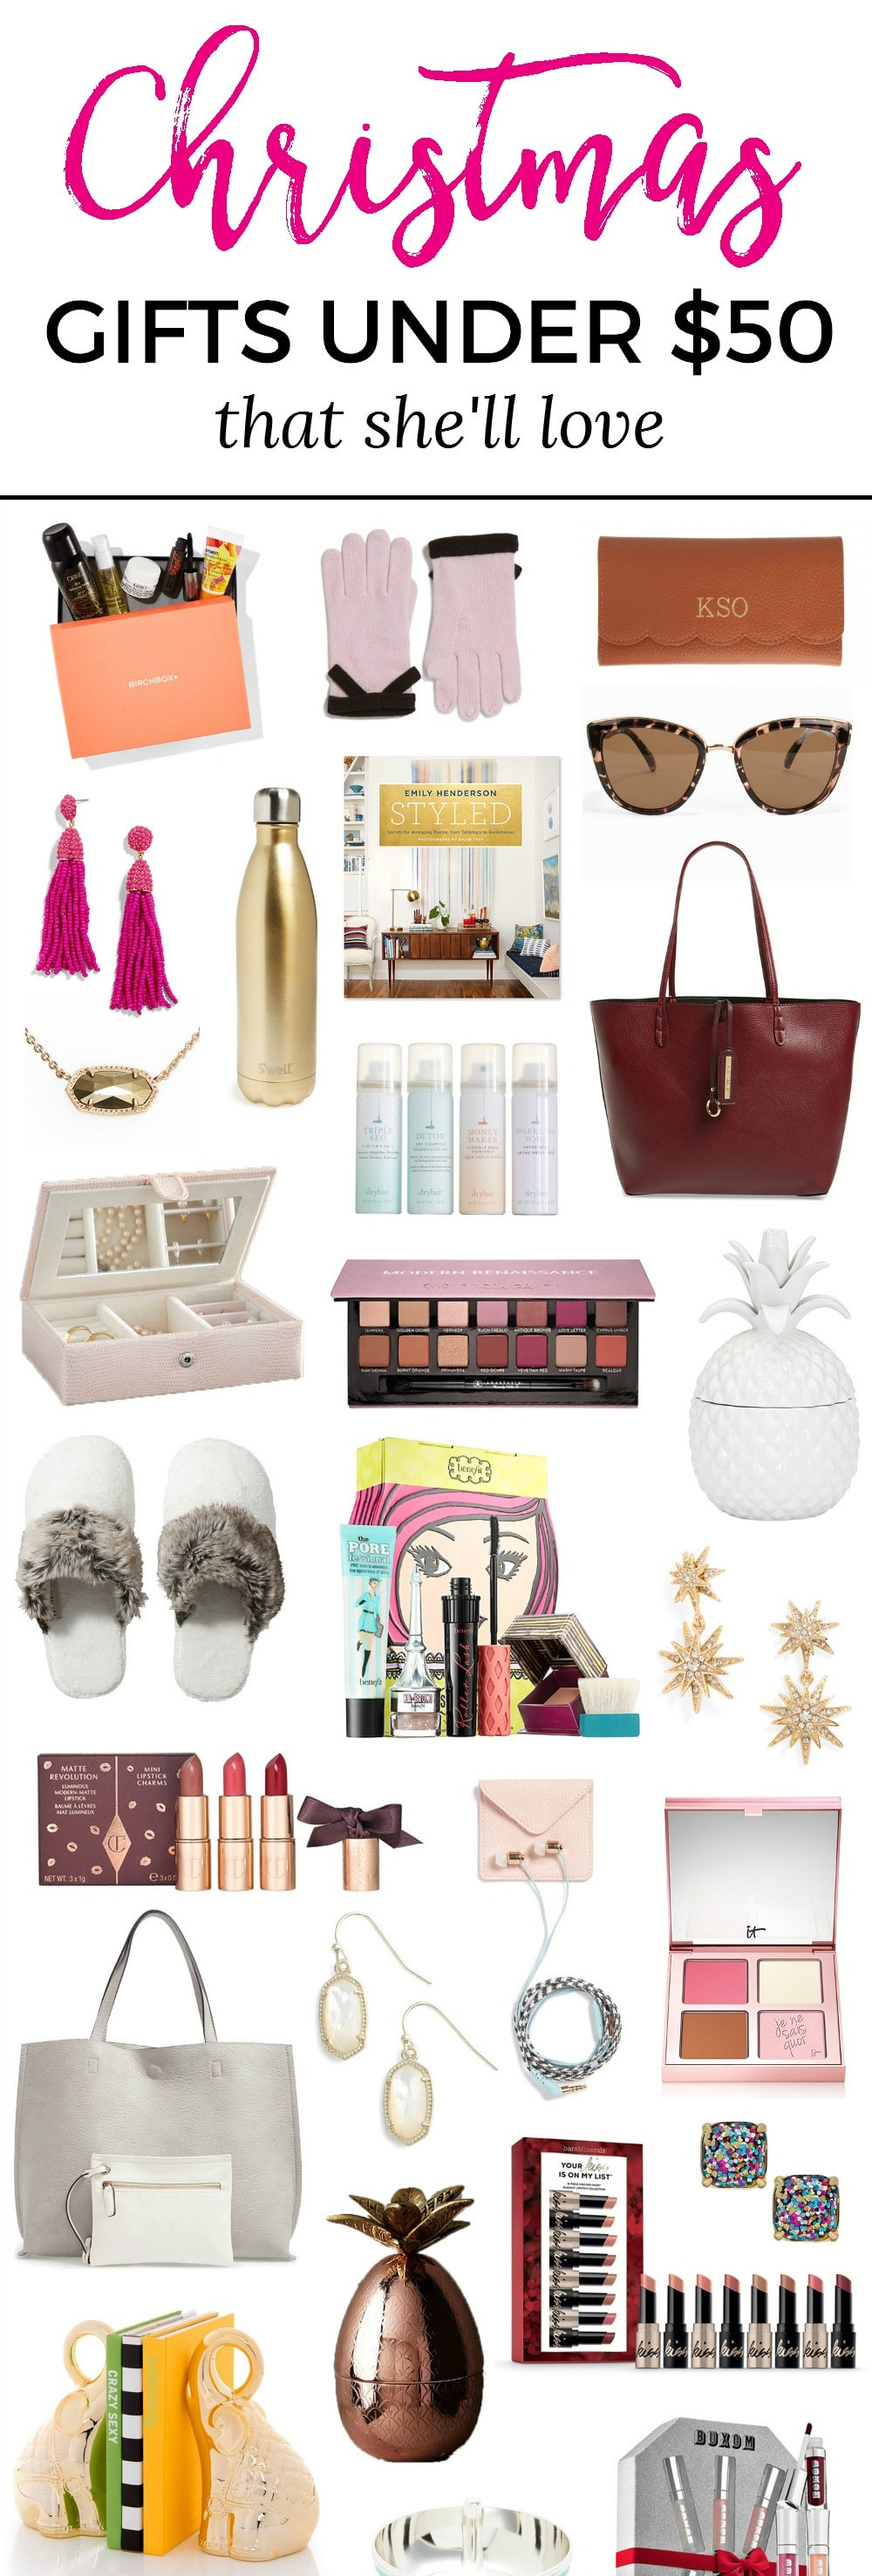 Ladies Christmas Gift Ideas
 The Best Christmas Gift Ideas for Women under $50